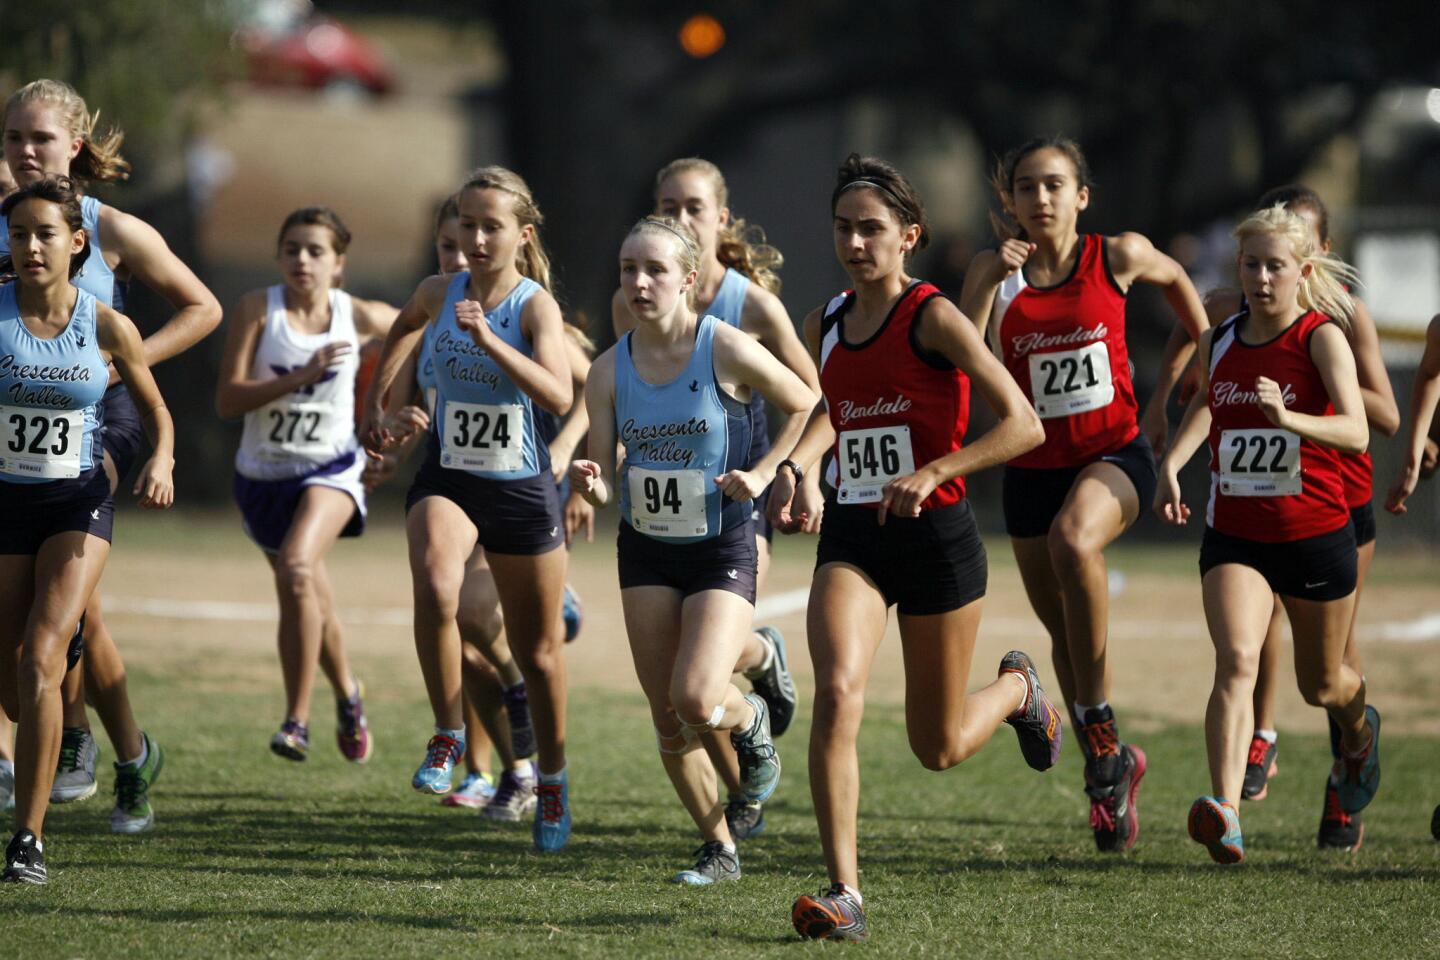 Runners sprint at the start line during a meet at Crescenta Valley Park on Thursday, November 1, 2012.